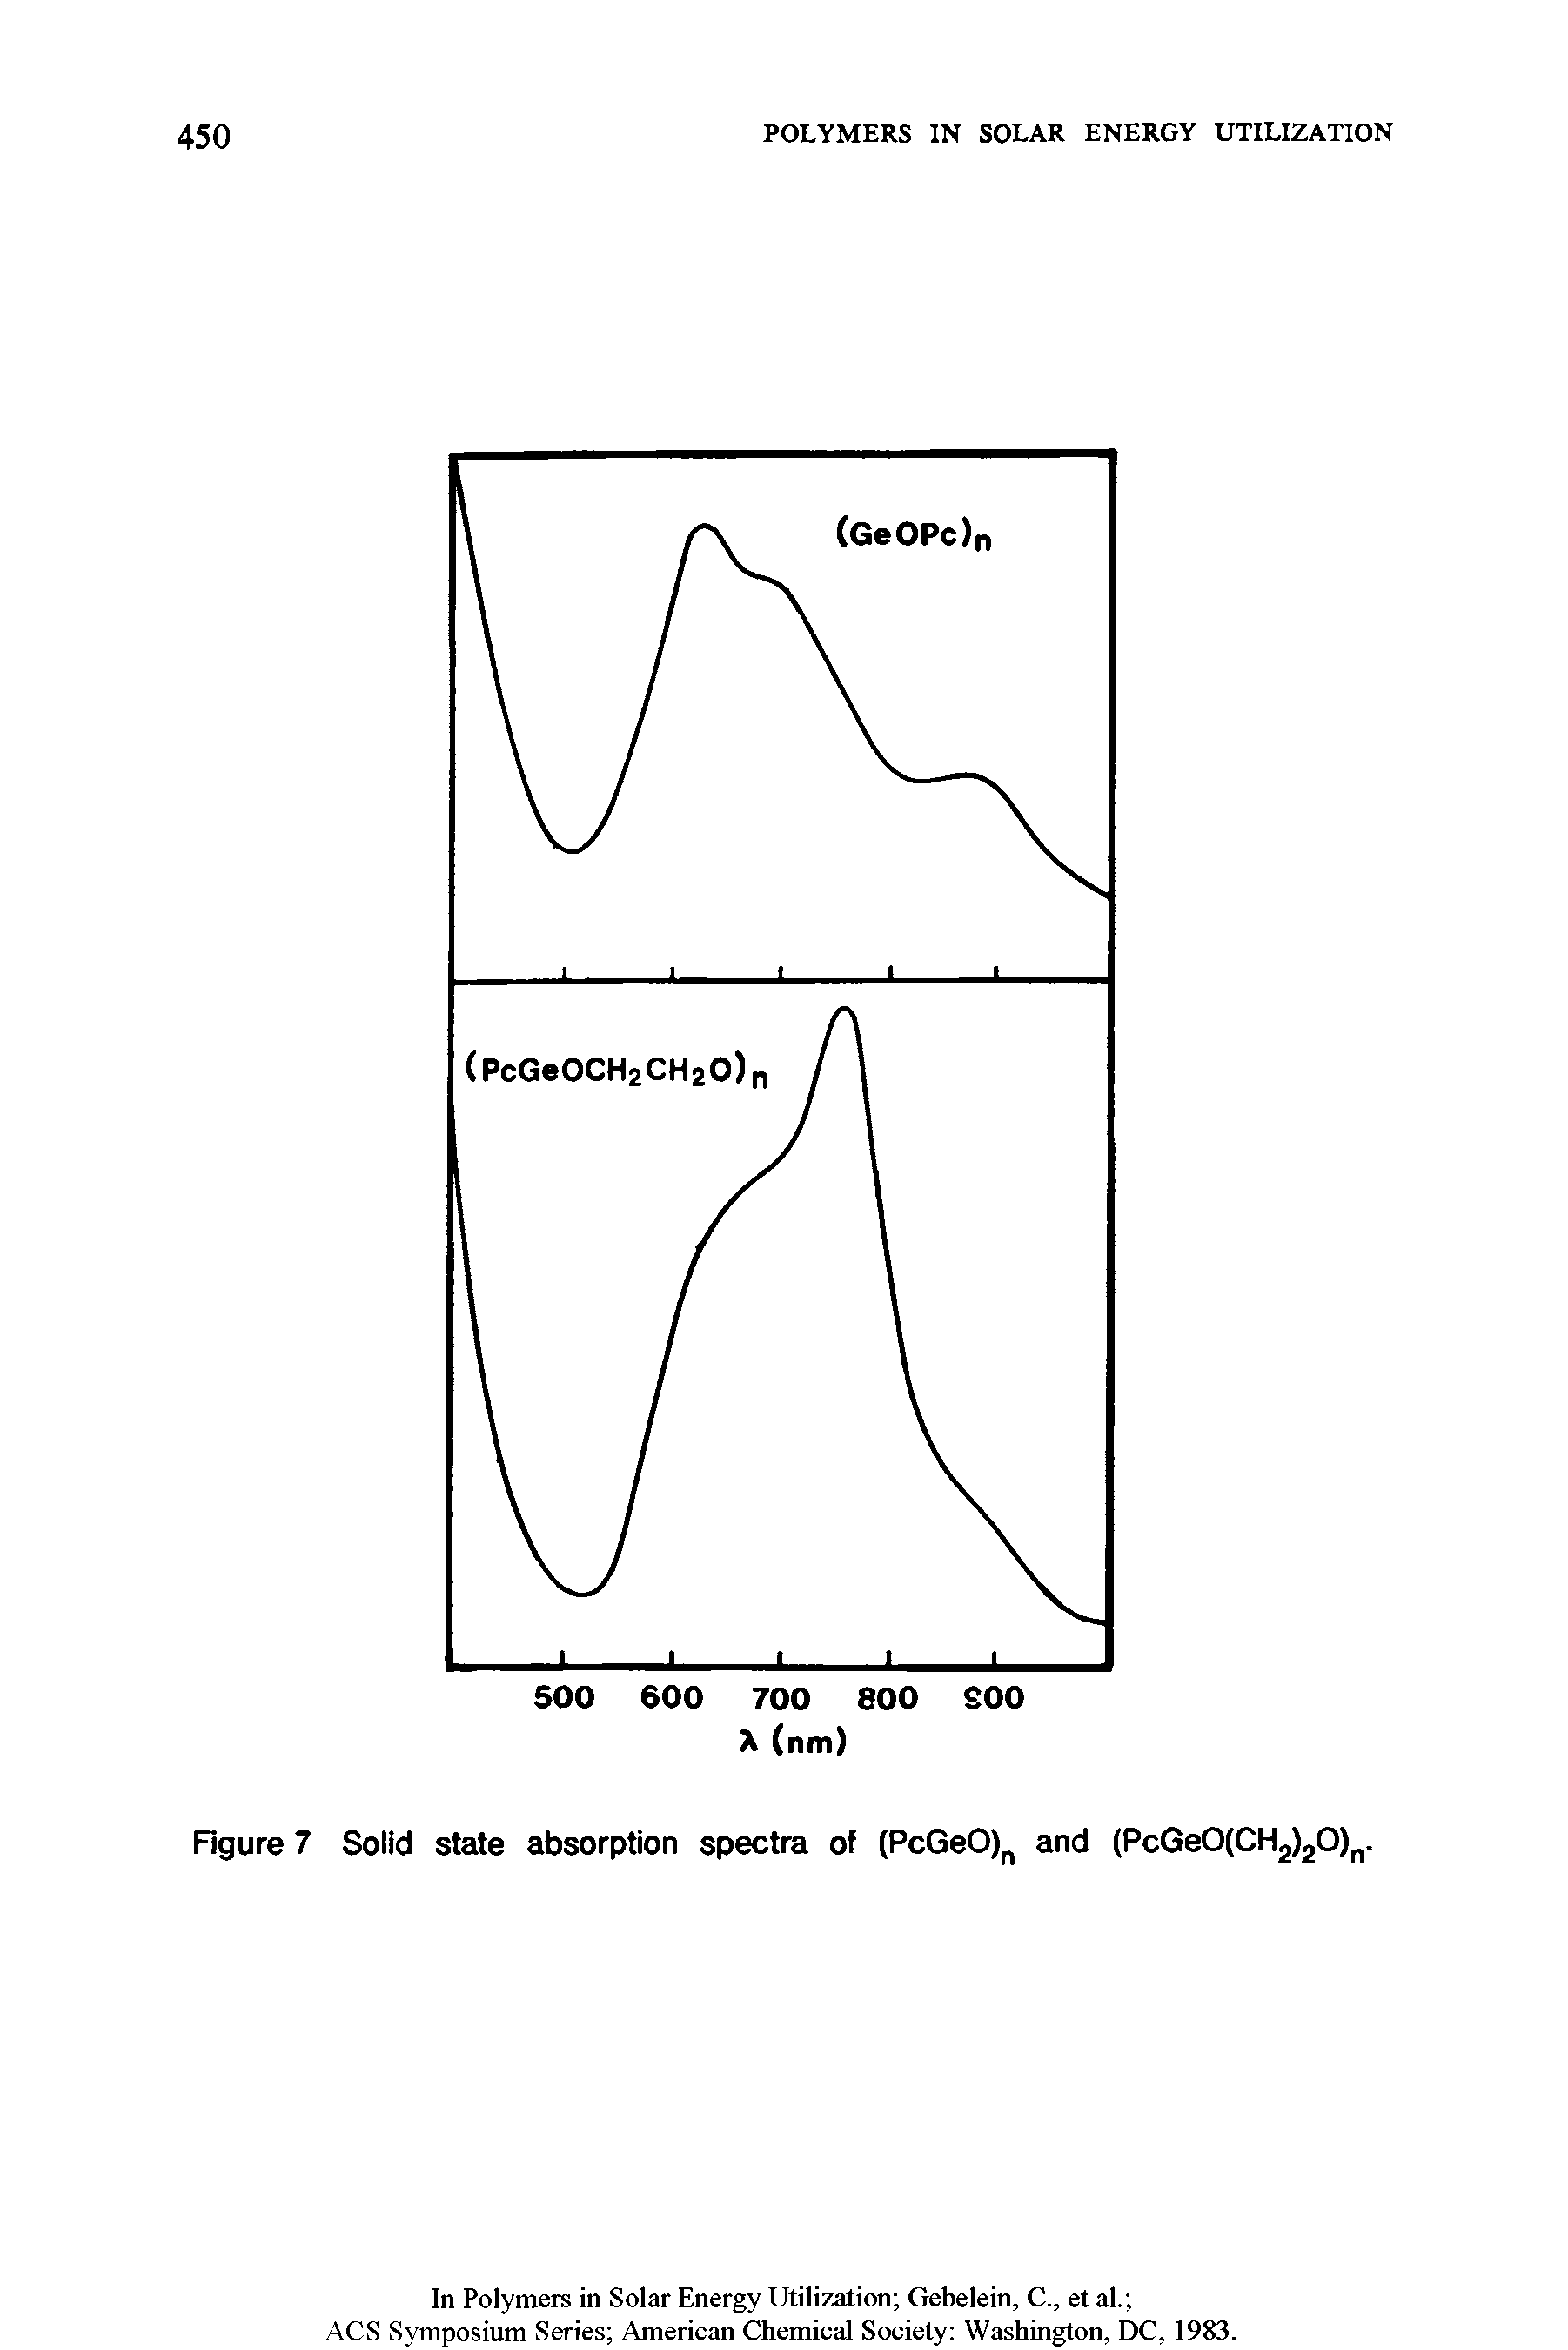 Figure 7 Solid state absorption spectra of (PcGeO), and (PcGe0(CH2)20). ...